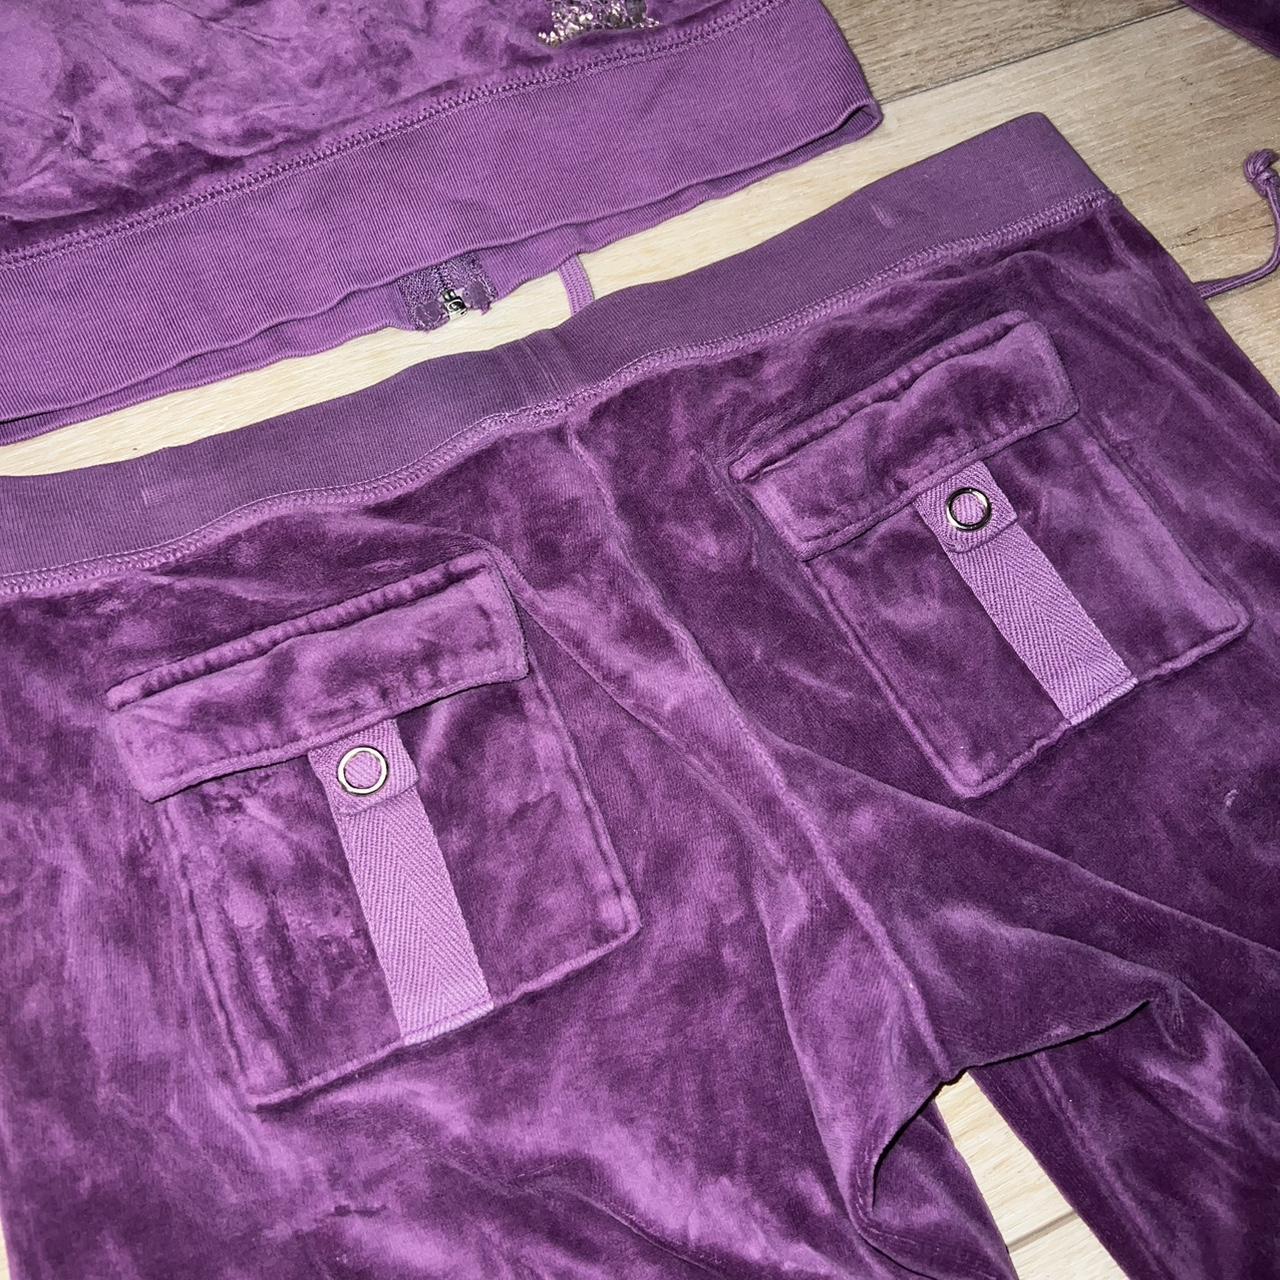 Authentic Juicy Couture tracksuit 🍇 early 2000s y2k - Depop